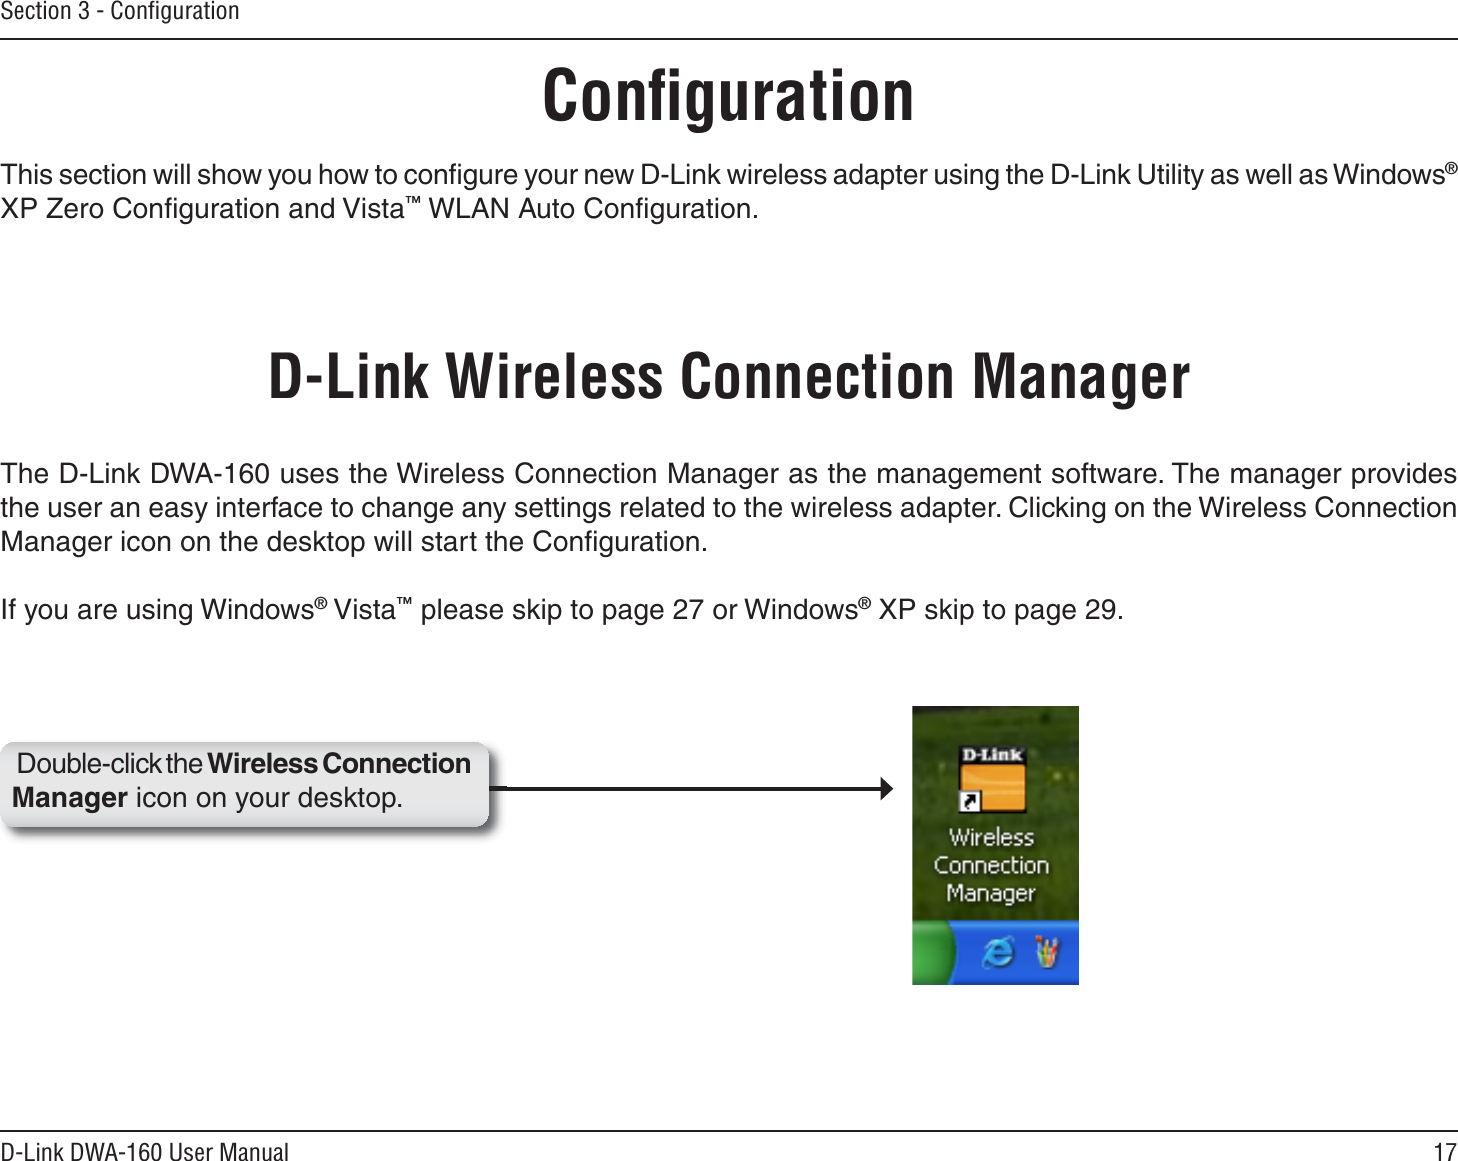 17D-Link DWA-160 User ManualSection 3 - ConﬁgurationConﬁgurationThis section will show you how to conﬁgure your new D-Link wireless adapter using the D-Link Utility as well as Windows®XP Zero Conﬁguration and Vista™ WLAN Auto Conﬁguration.D-Link Wireless Connection ManagerThe D-Link DWA-160 uses the Wireless Connection Manager as the management software. The manager provides the user an easy interface to change any settings related to the wireless adapter. Clicking on the Wireless Connection Manager icon on the desktop will start the Conﬁguration.If you are using Windows® Vista™ please skip to page 27 or Windows® XP skip to page 29.Double-click the Wireless Connection Manager icon on your desktop.